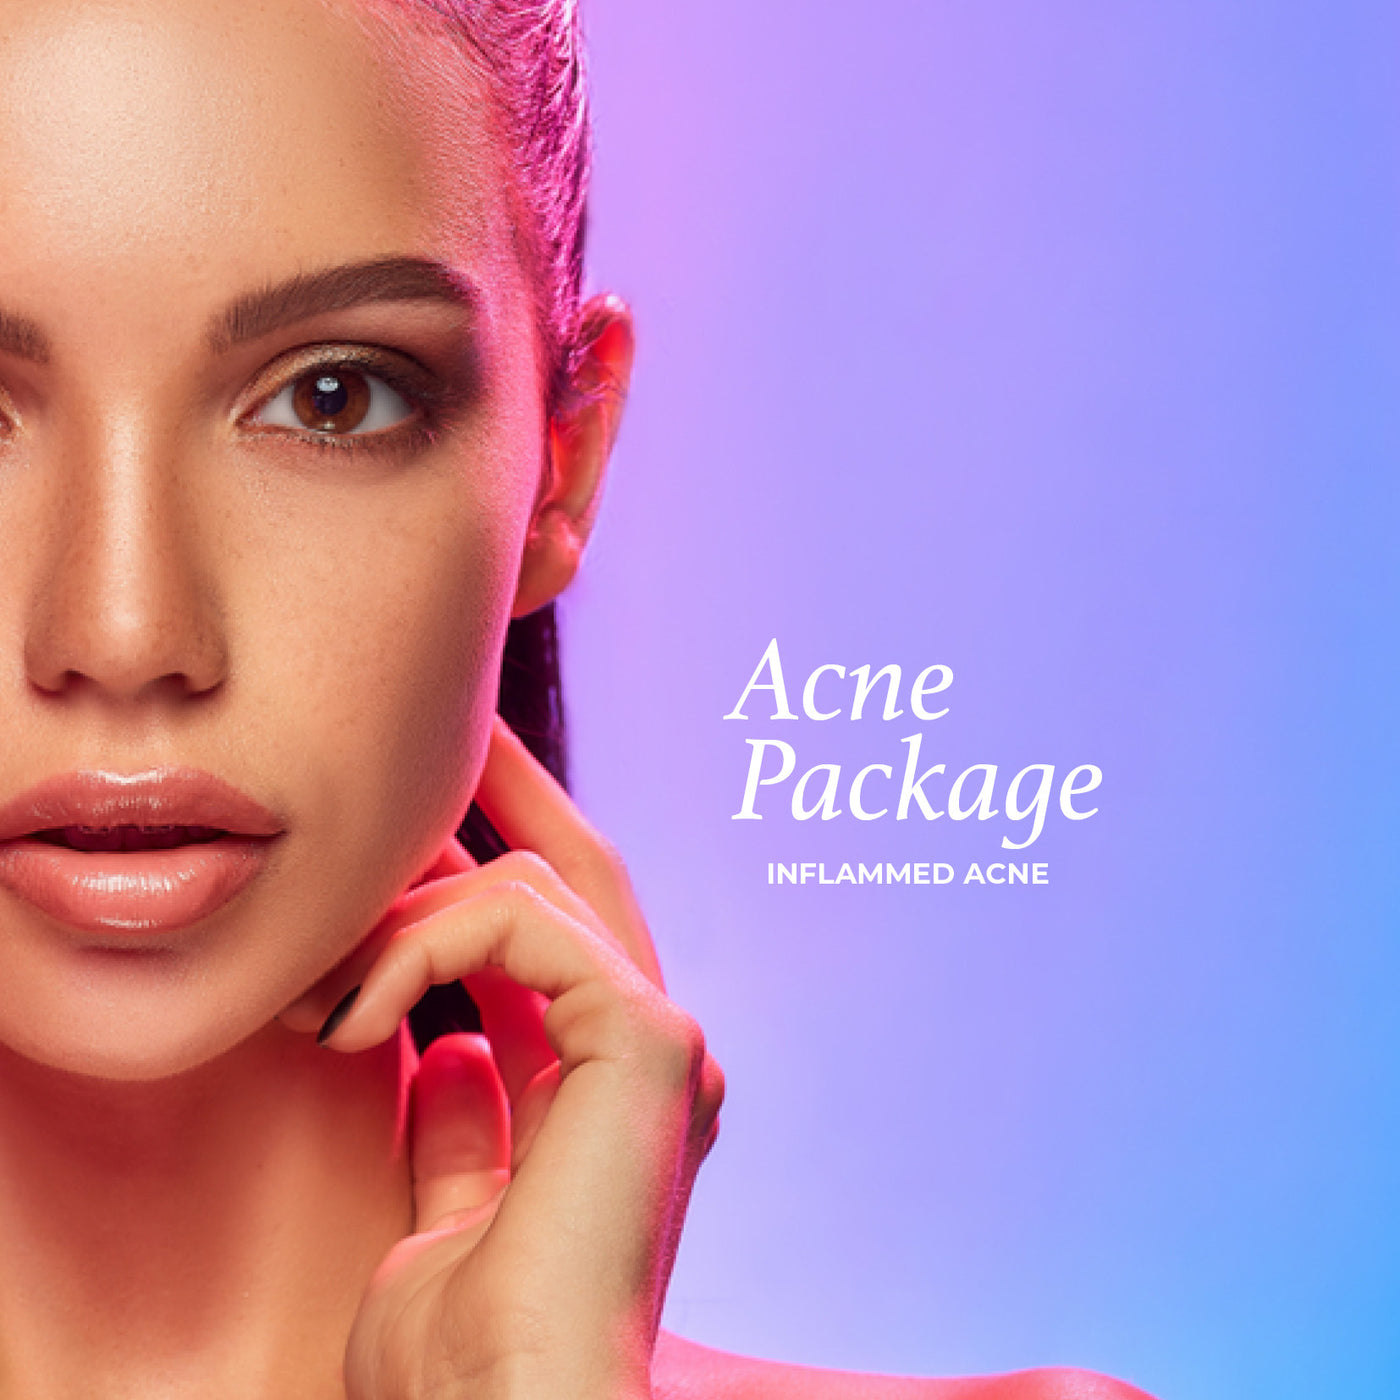 Acne Package - Inflamed Acne